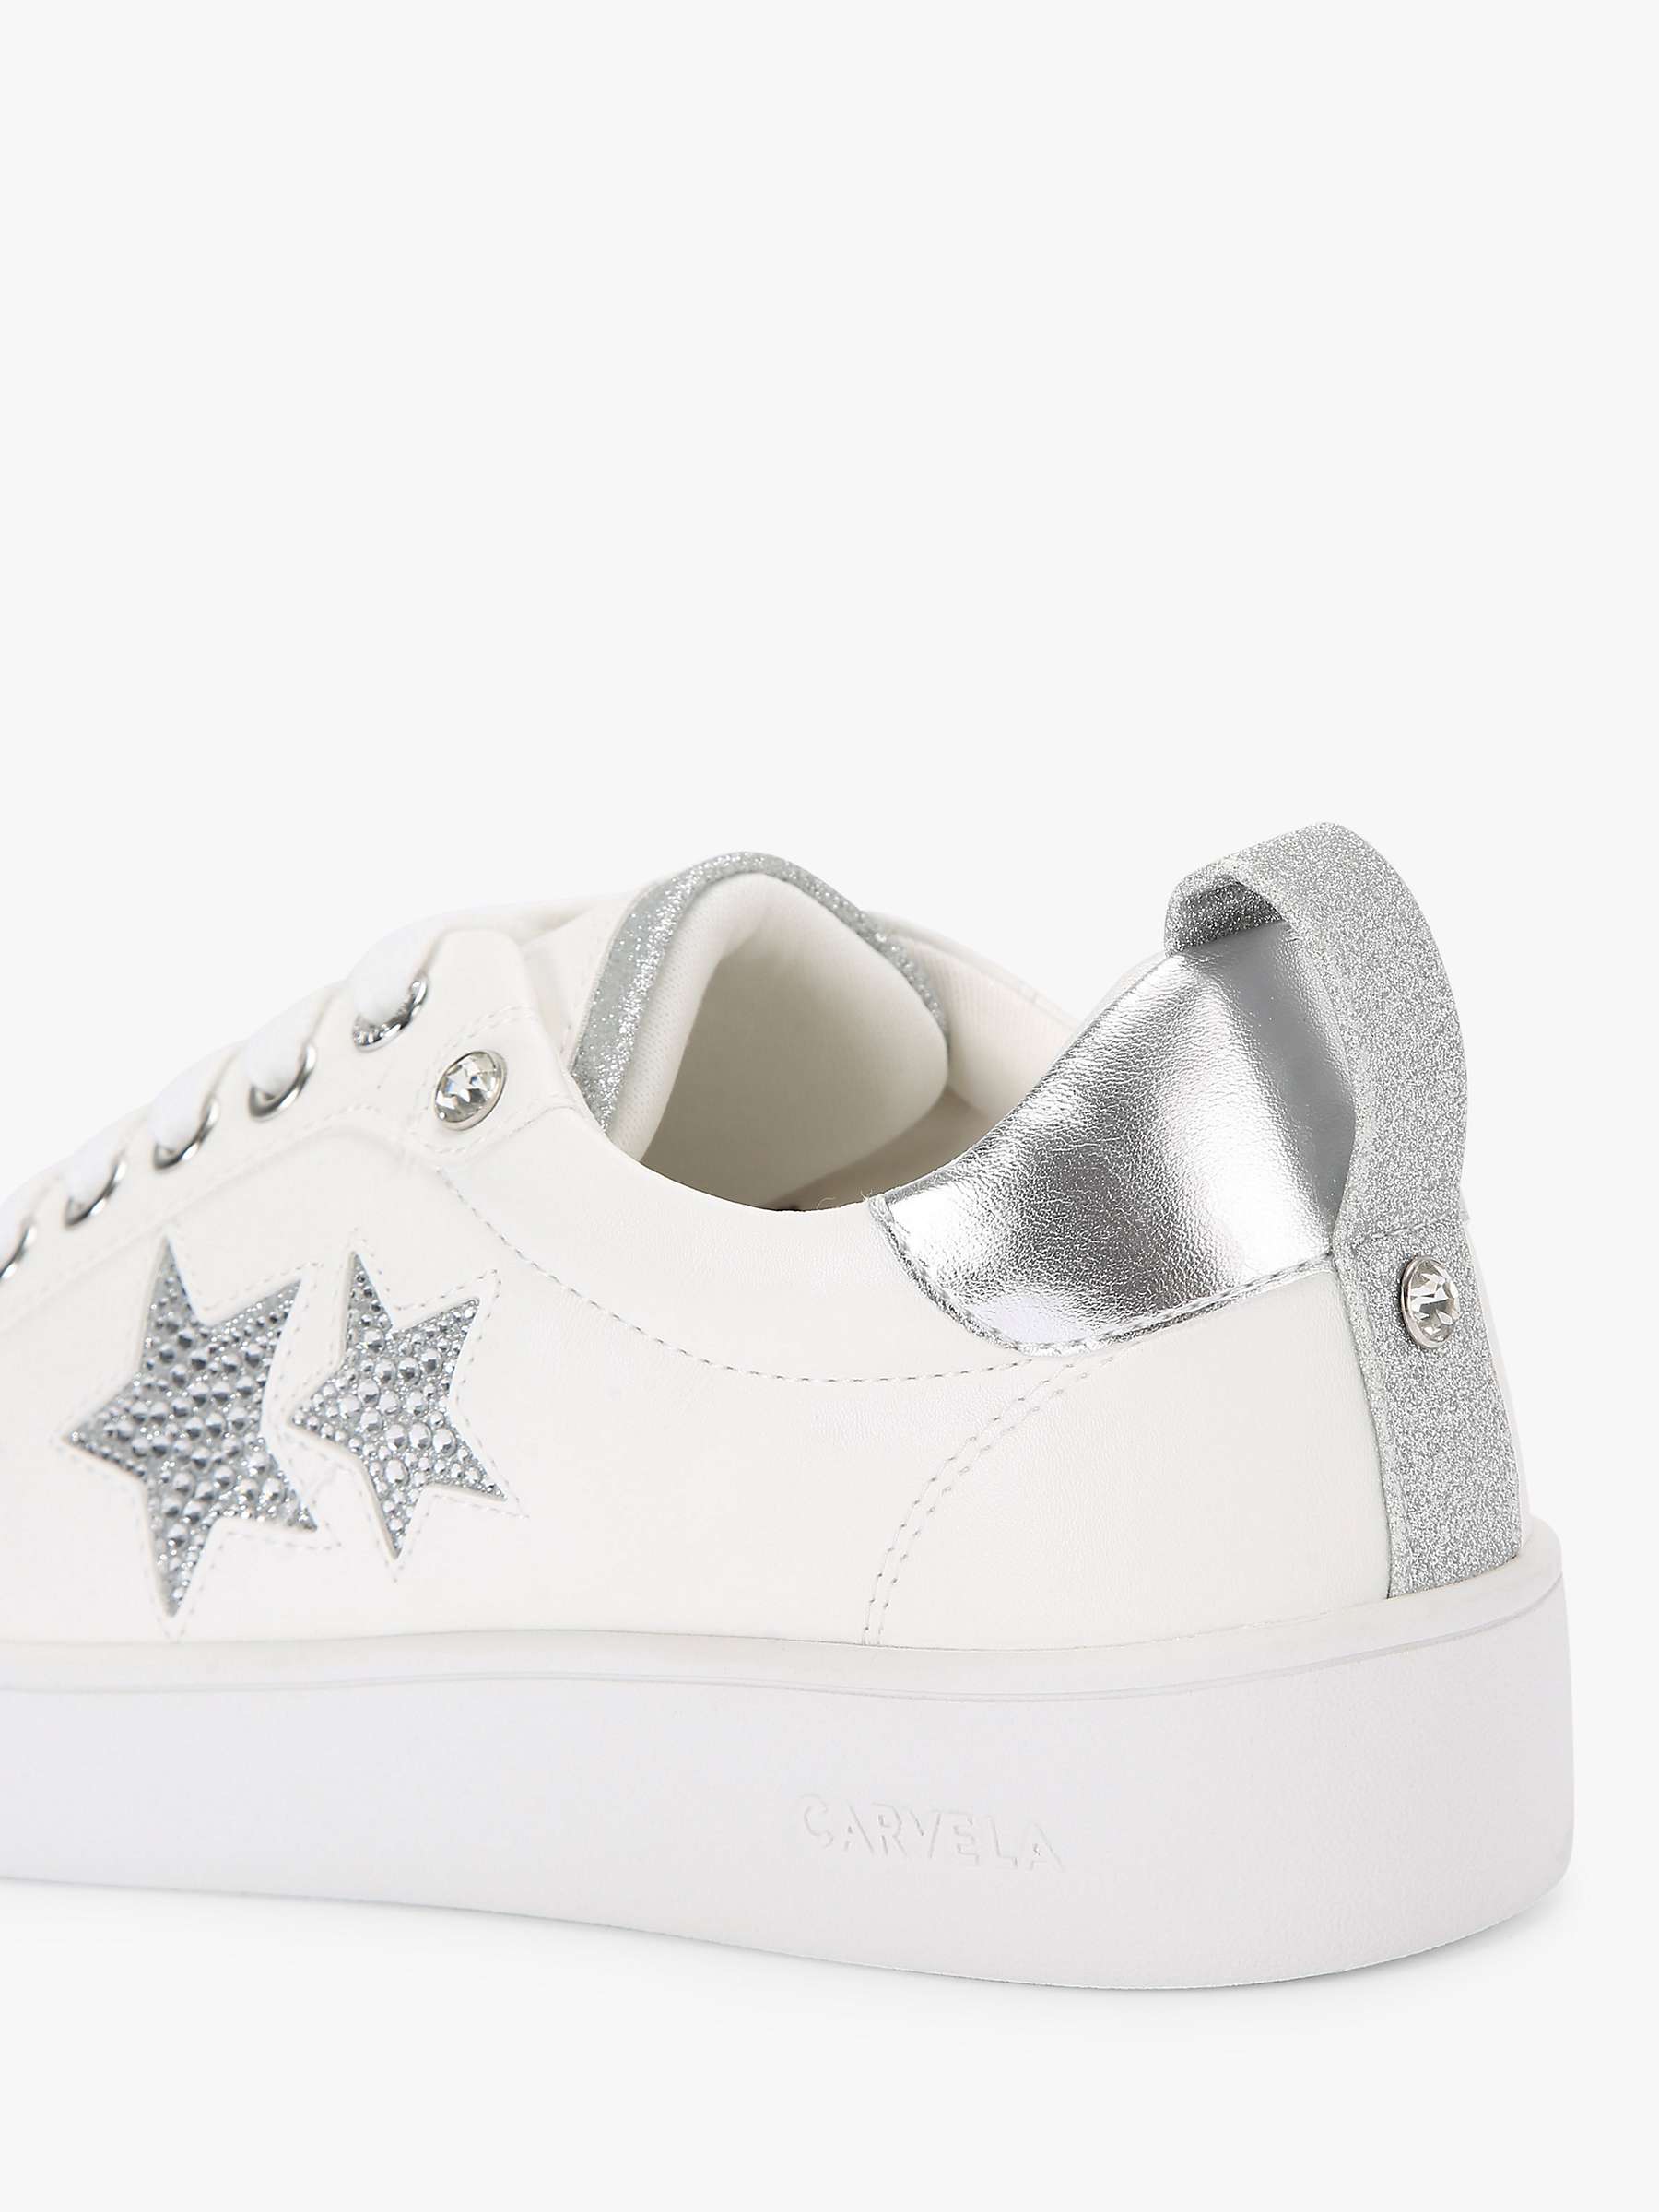 Buy Carvela Galaxy Star Embellished Trainers, White Online at johnlewis.com